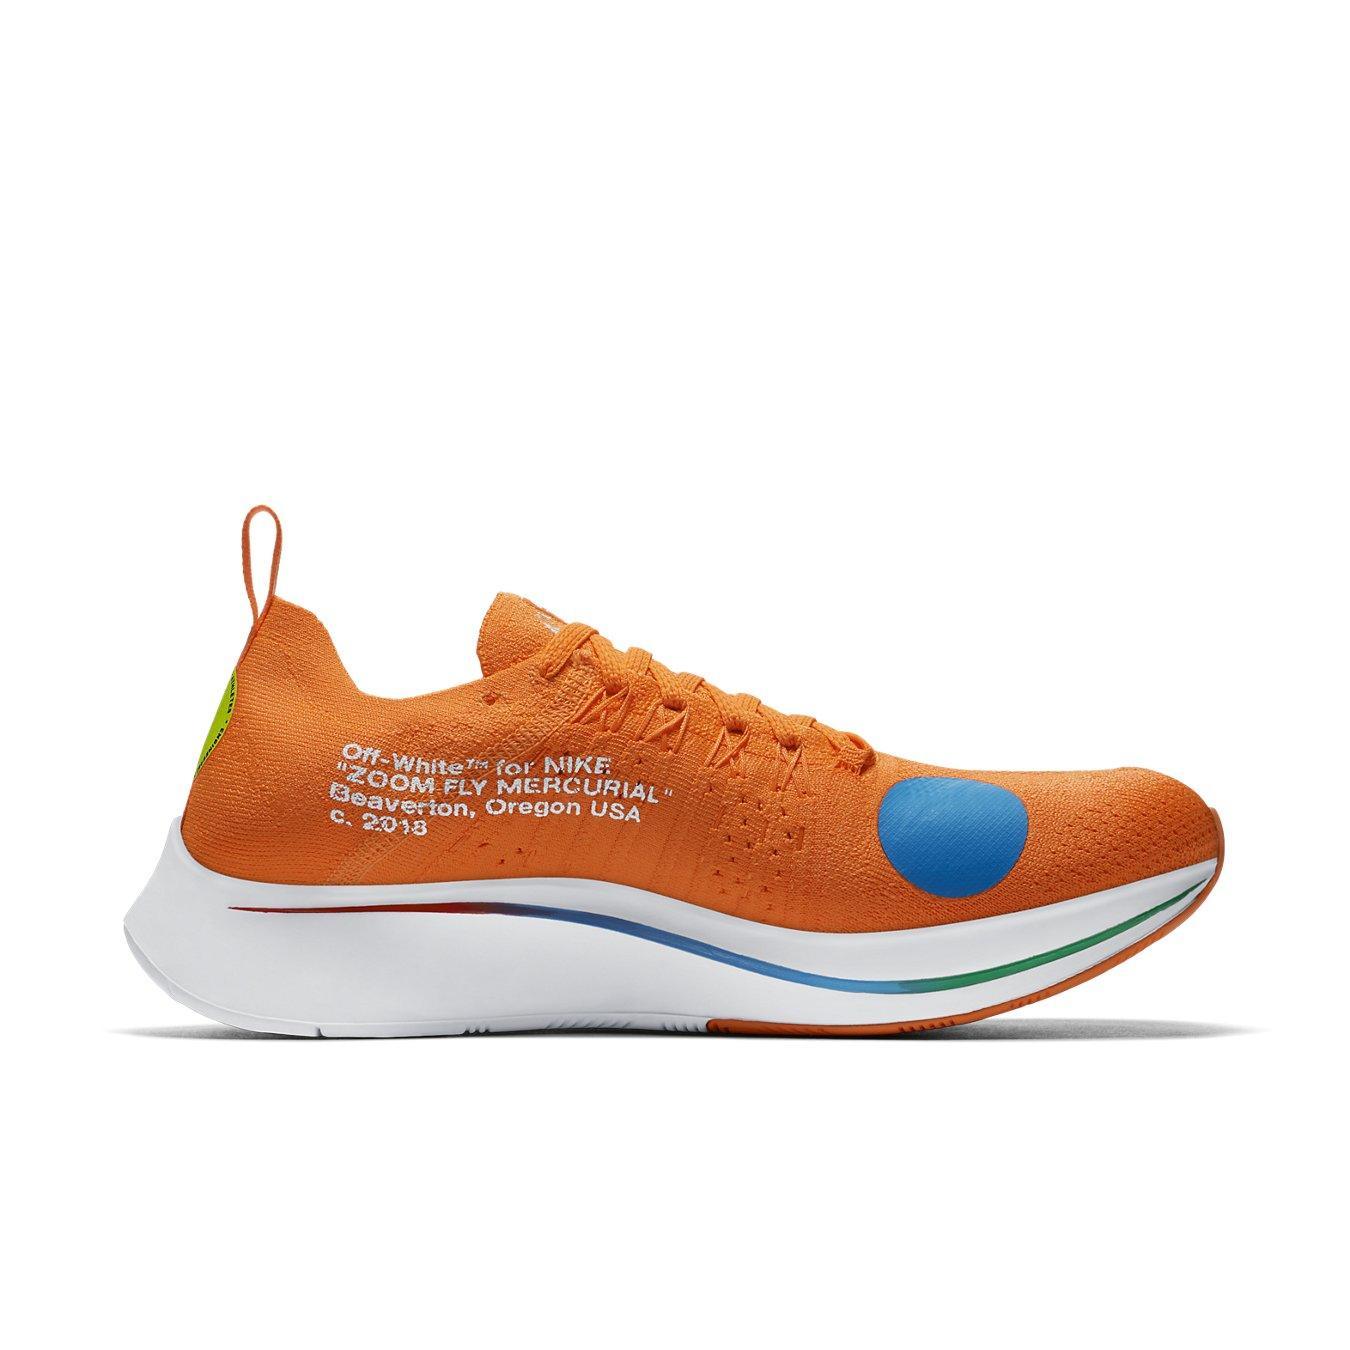 hierarki mens sigte Nike Zoom Fly Mercurial Off-White Total Orange - AO2115-800 — dropout